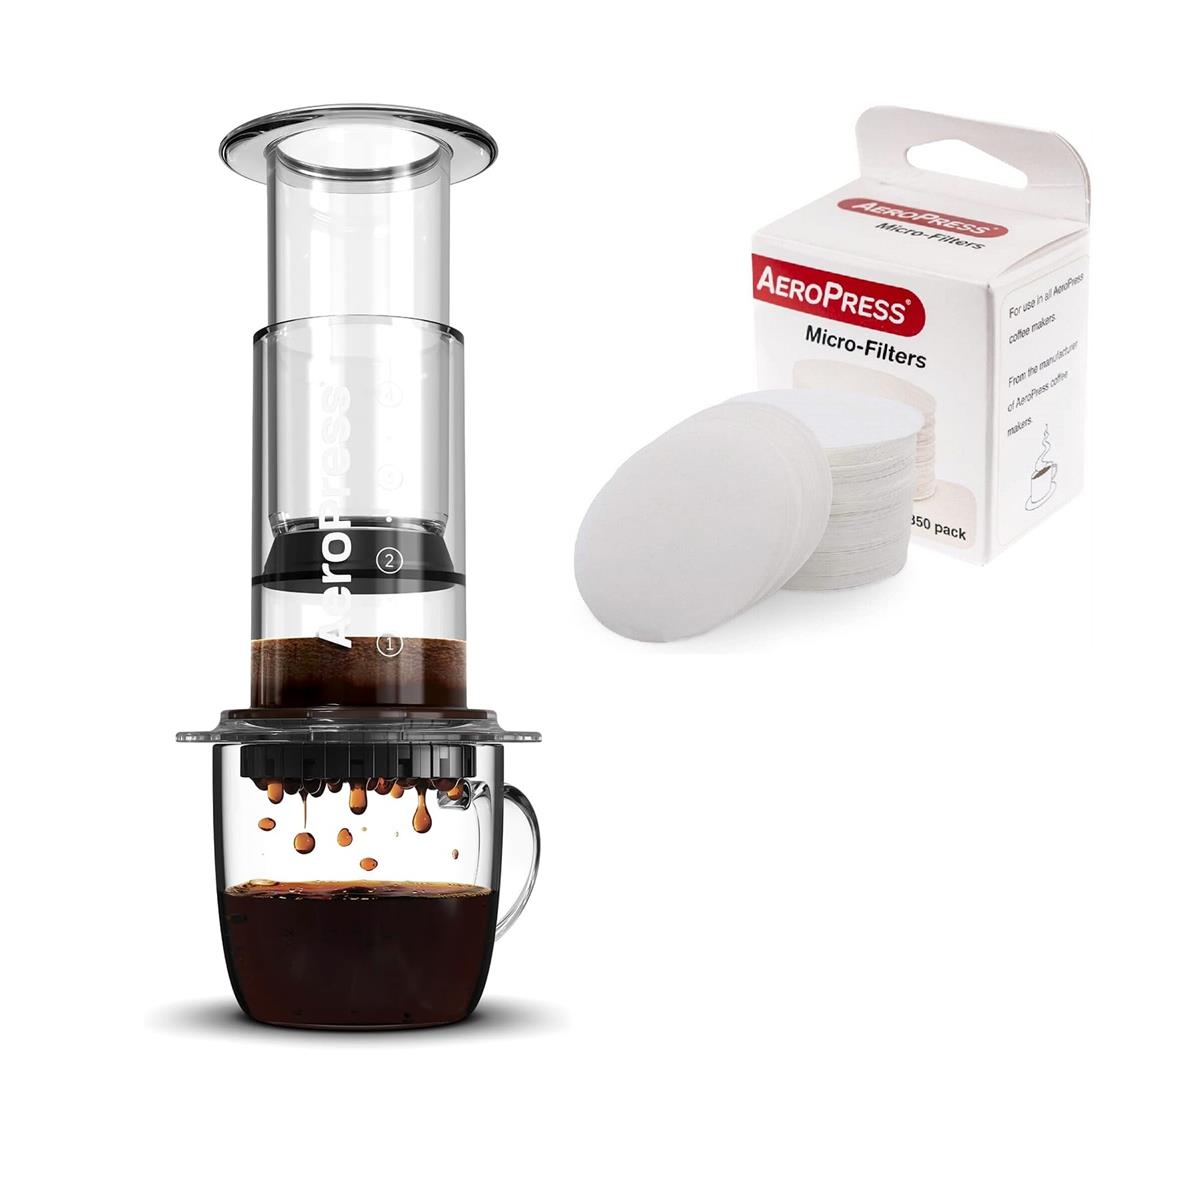 new special bundle with clear coffee maker (transparent) + 350 microfilters